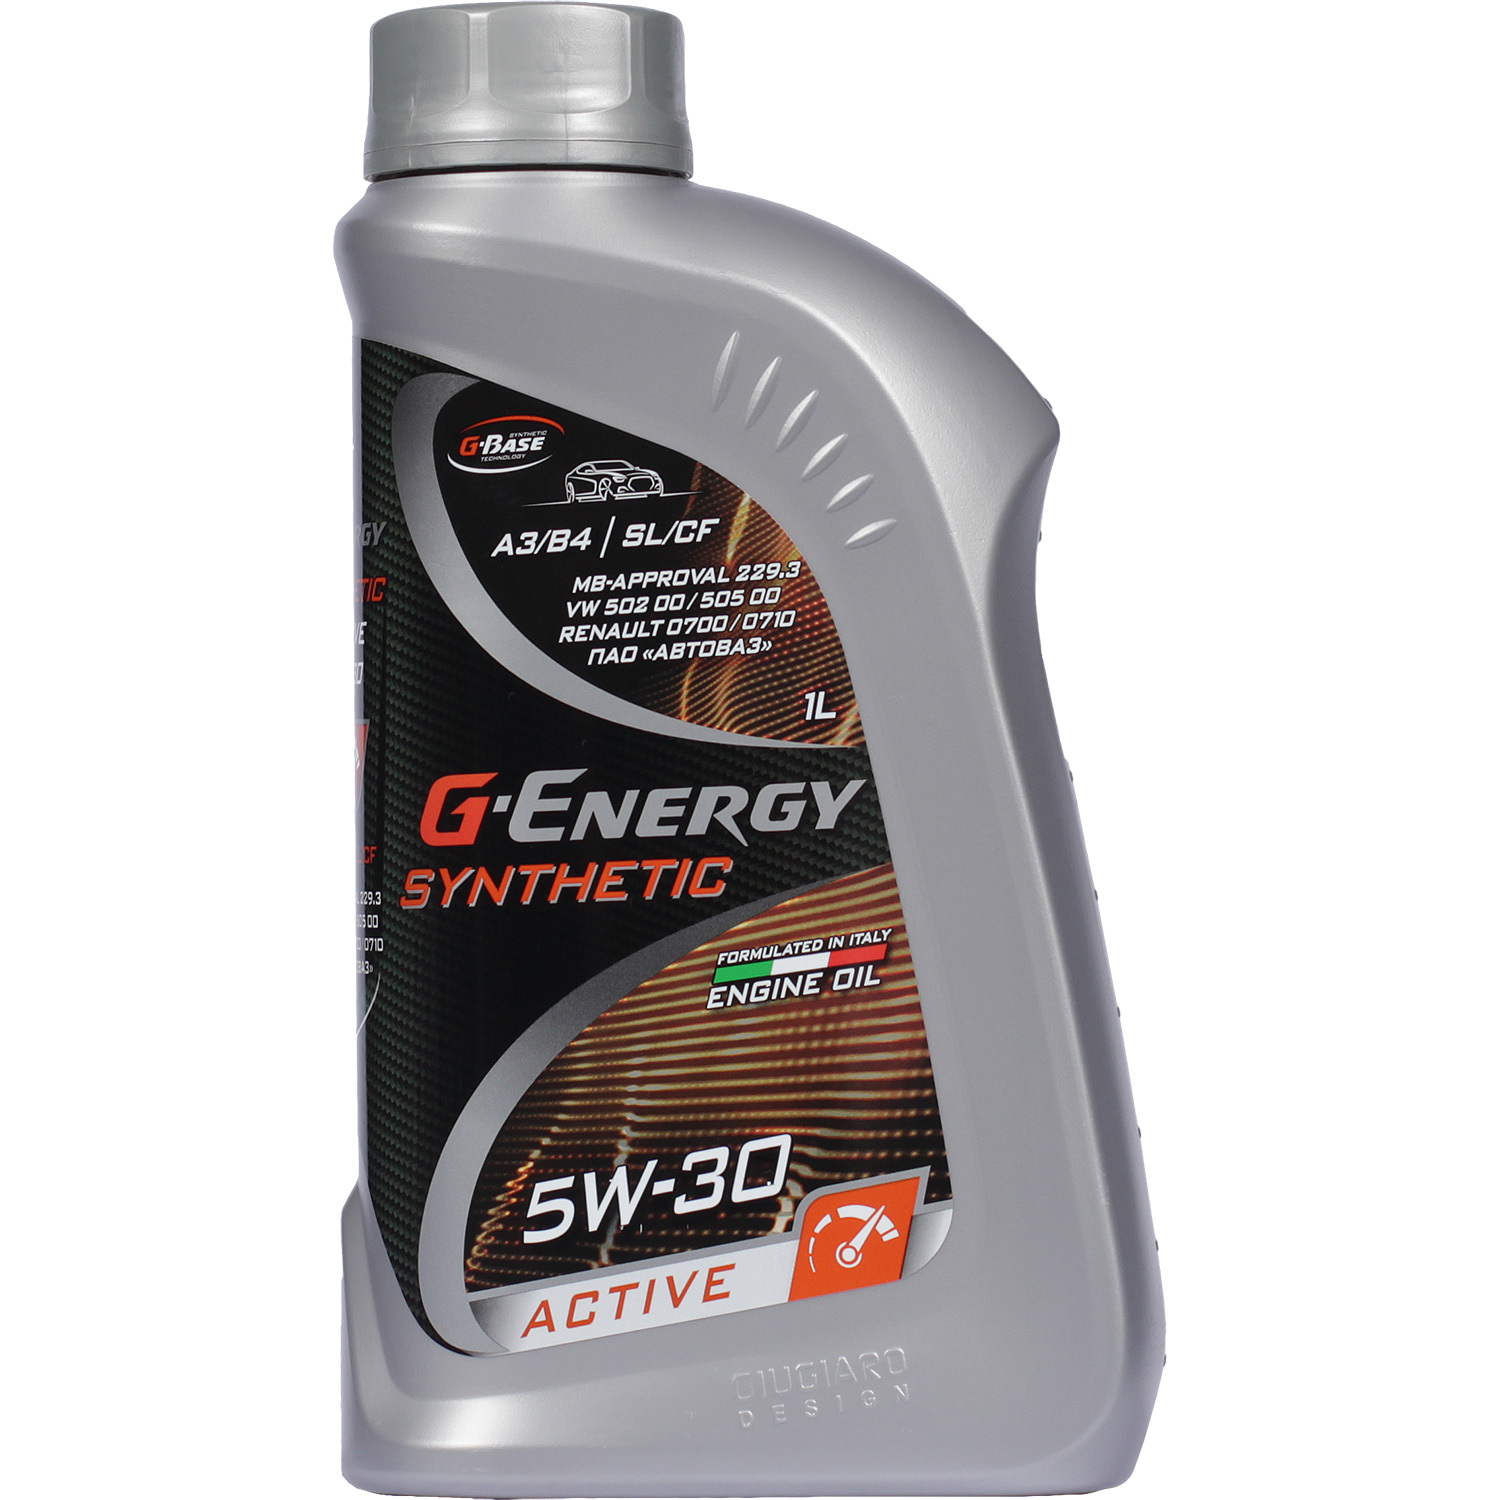 Моторное масло G-Energy Synthetic Active 5W-30, 1 л - фото 1